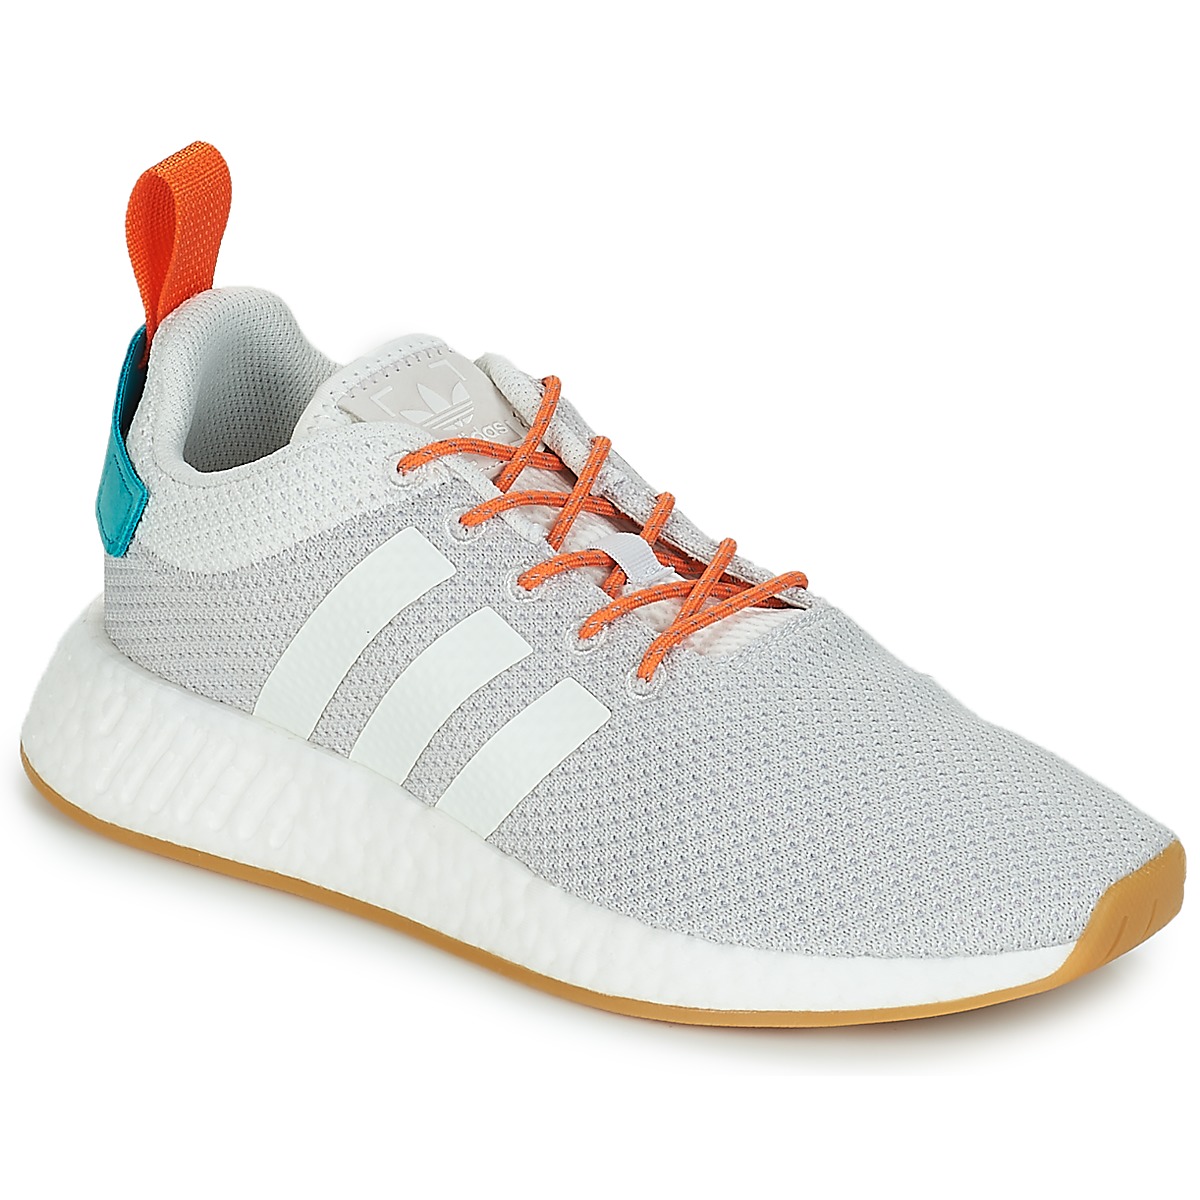 hungersnød boykot etik adidas Originals NMD R2 SUMMER Grey - Fast delivery | Spartoo Europe ! -  Shoes Low top trainers 132,00 €